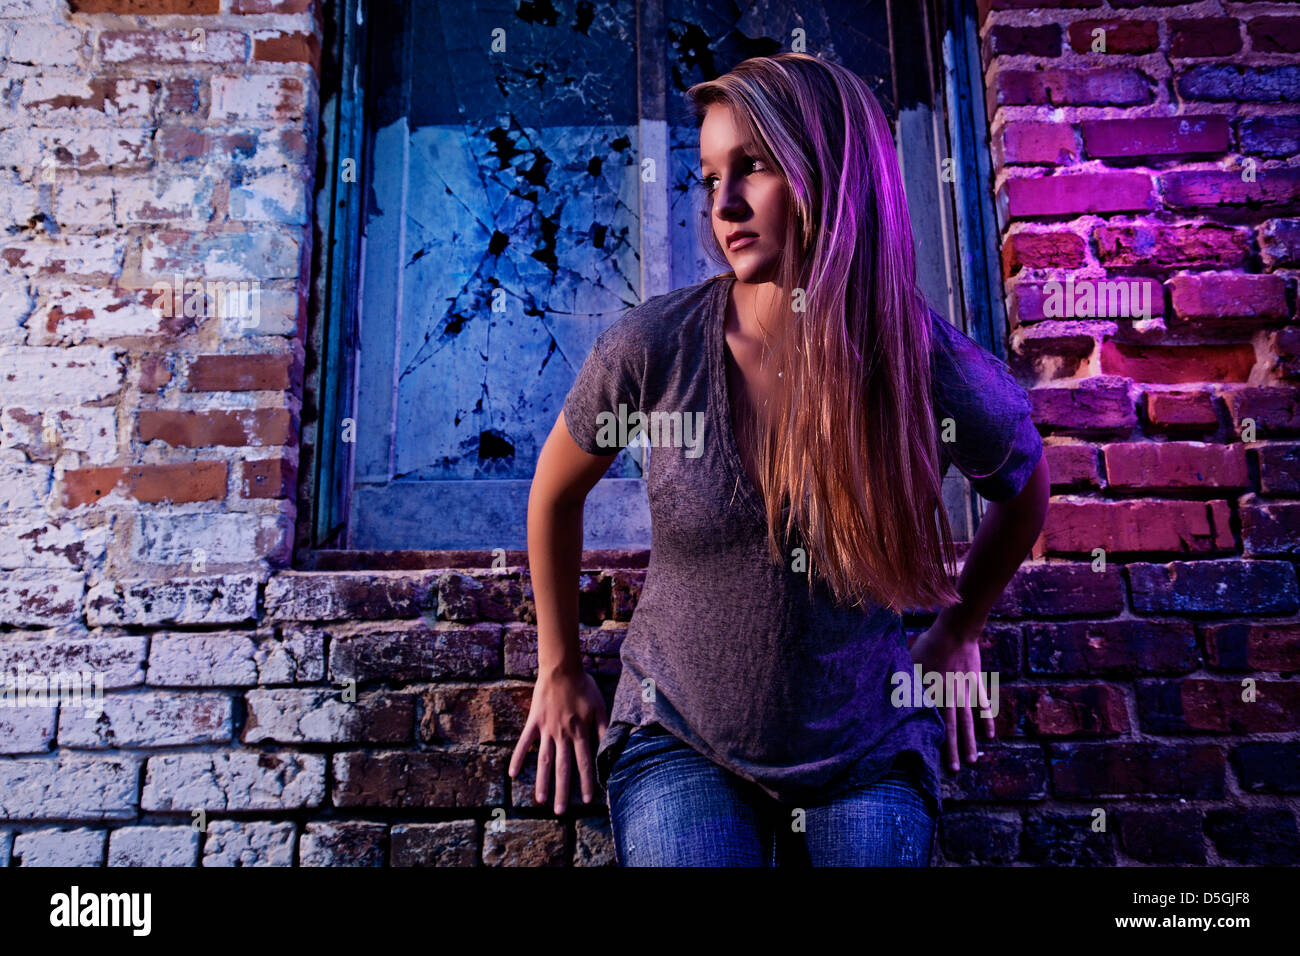 Teenage girl leaning against purple colored brick wall Stock Photo